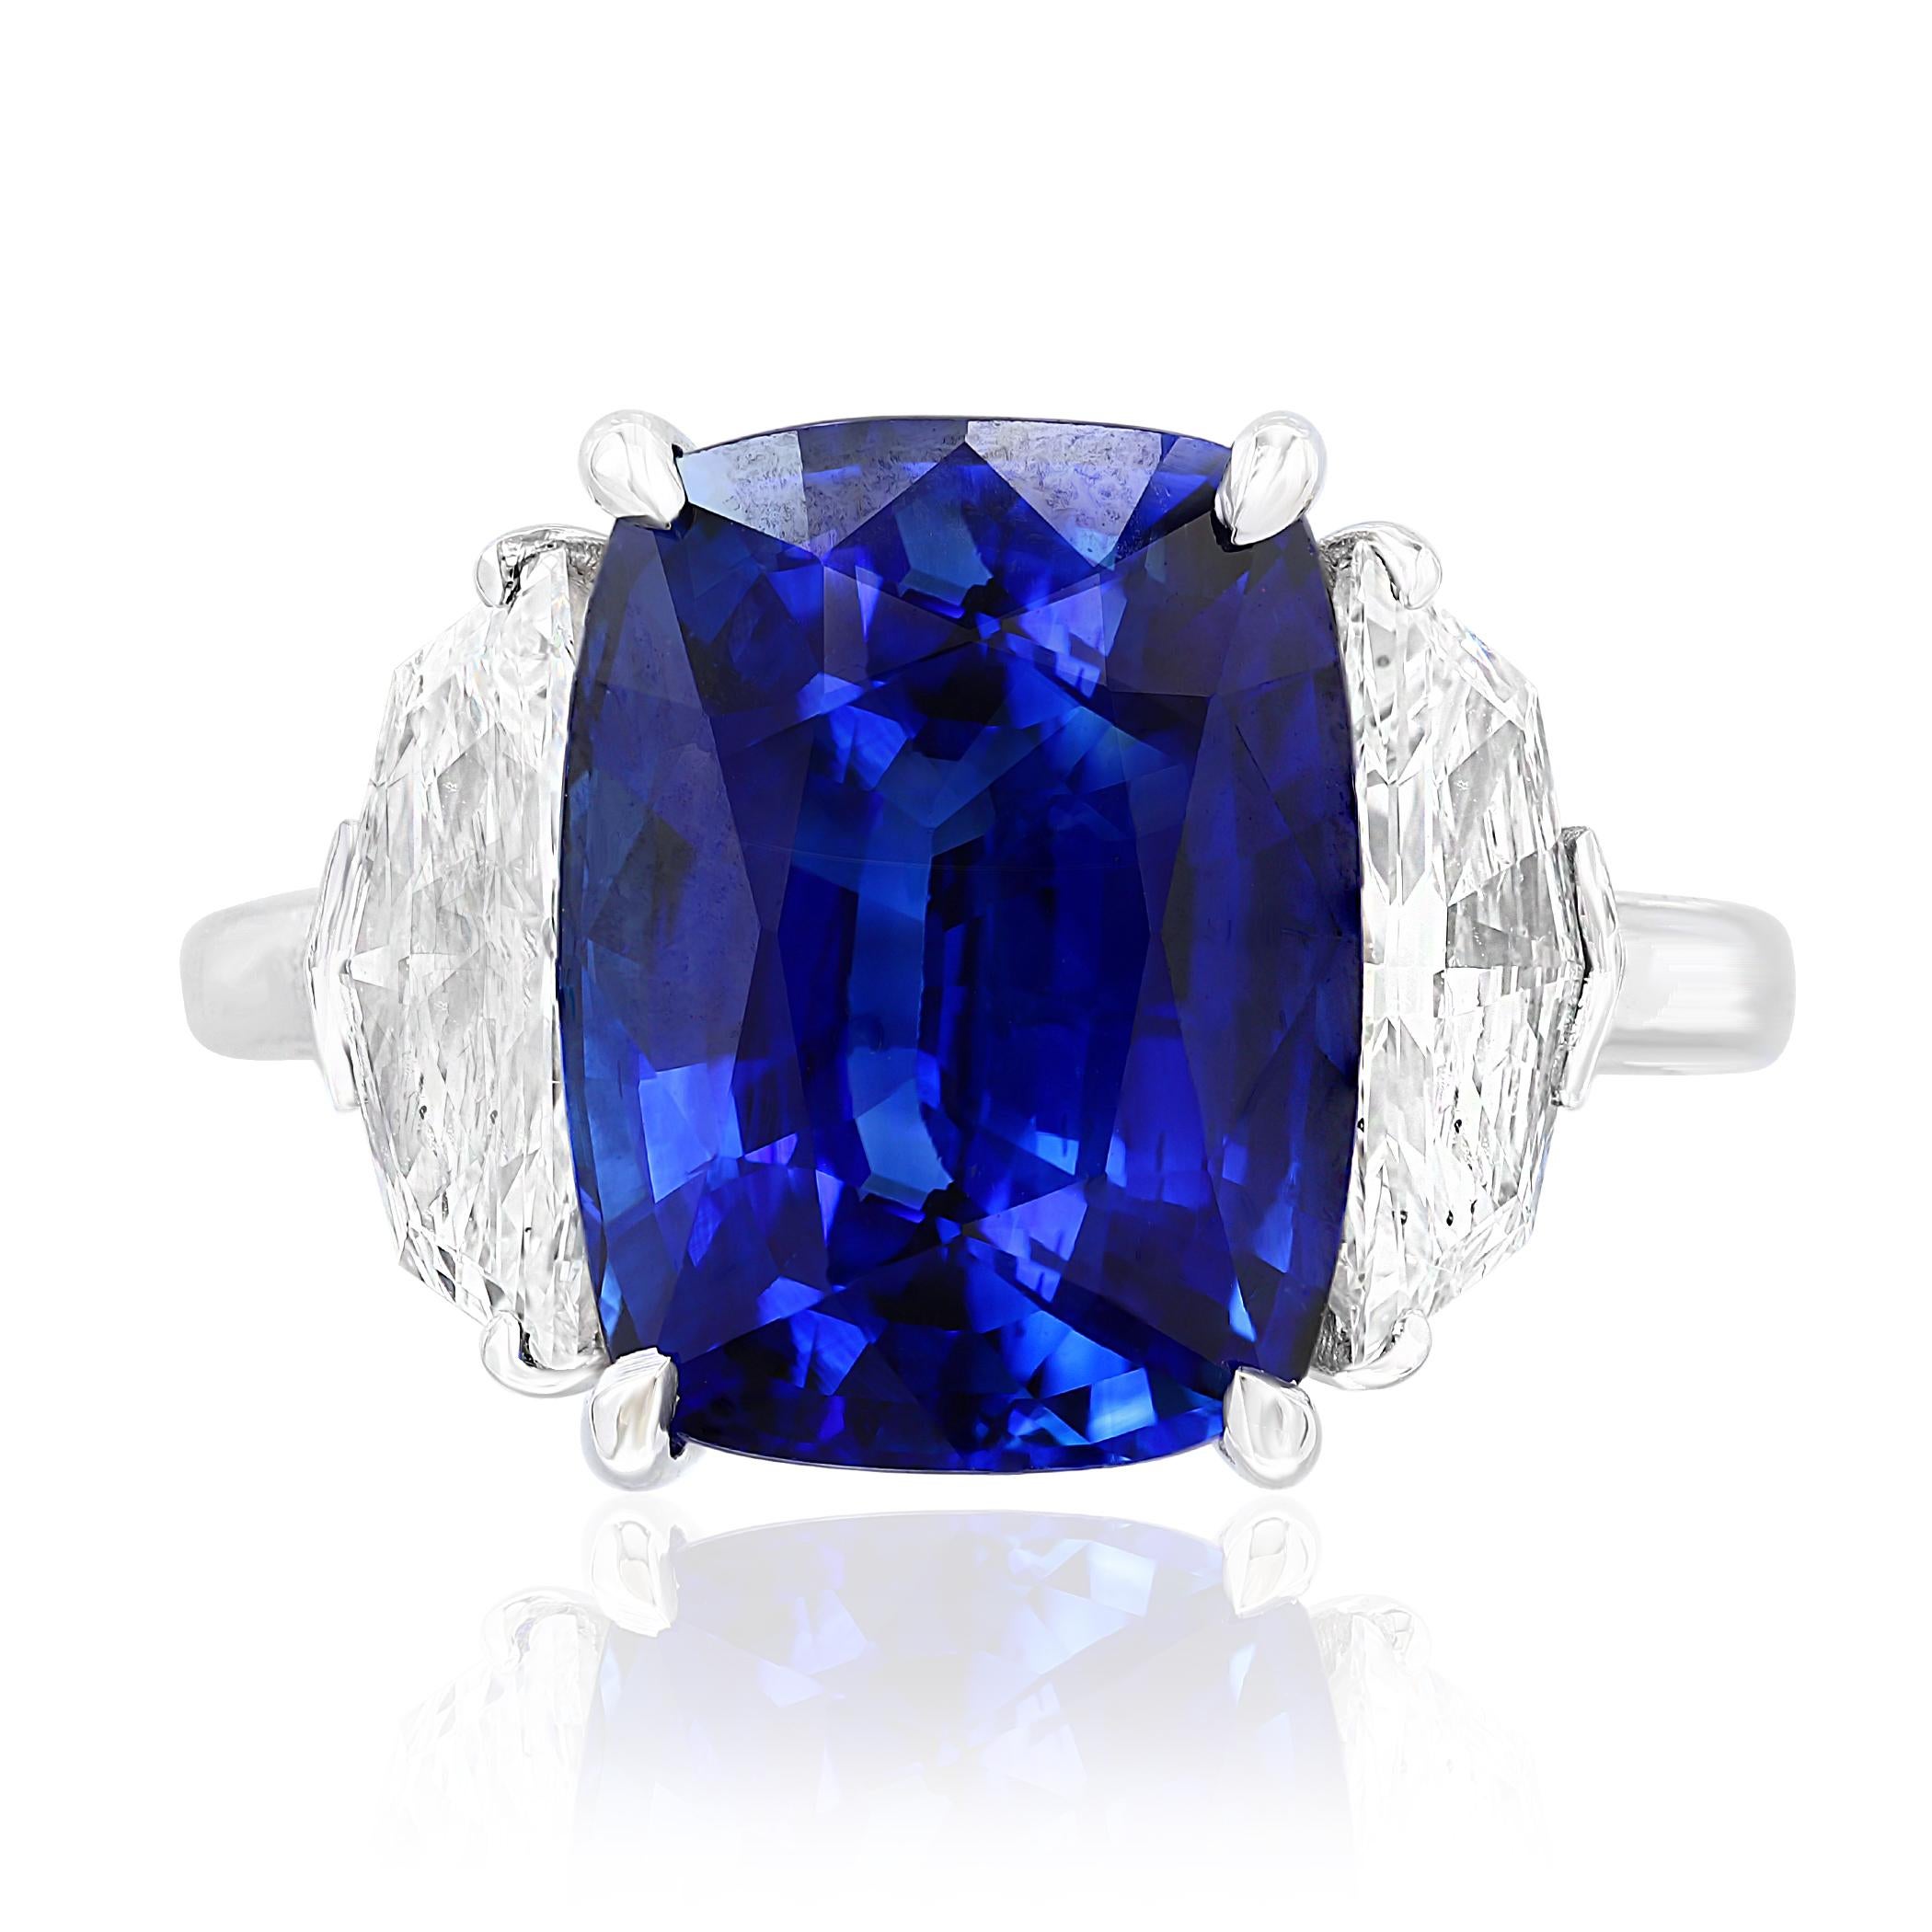 Showcases a Cushion cut, Vibrant color Blue Sapphire weighing 6.54 carats, flanked by two brilliant cut half moon diamonds weighing 1.24 carats total. Elegantly set in a polished platinum composition.